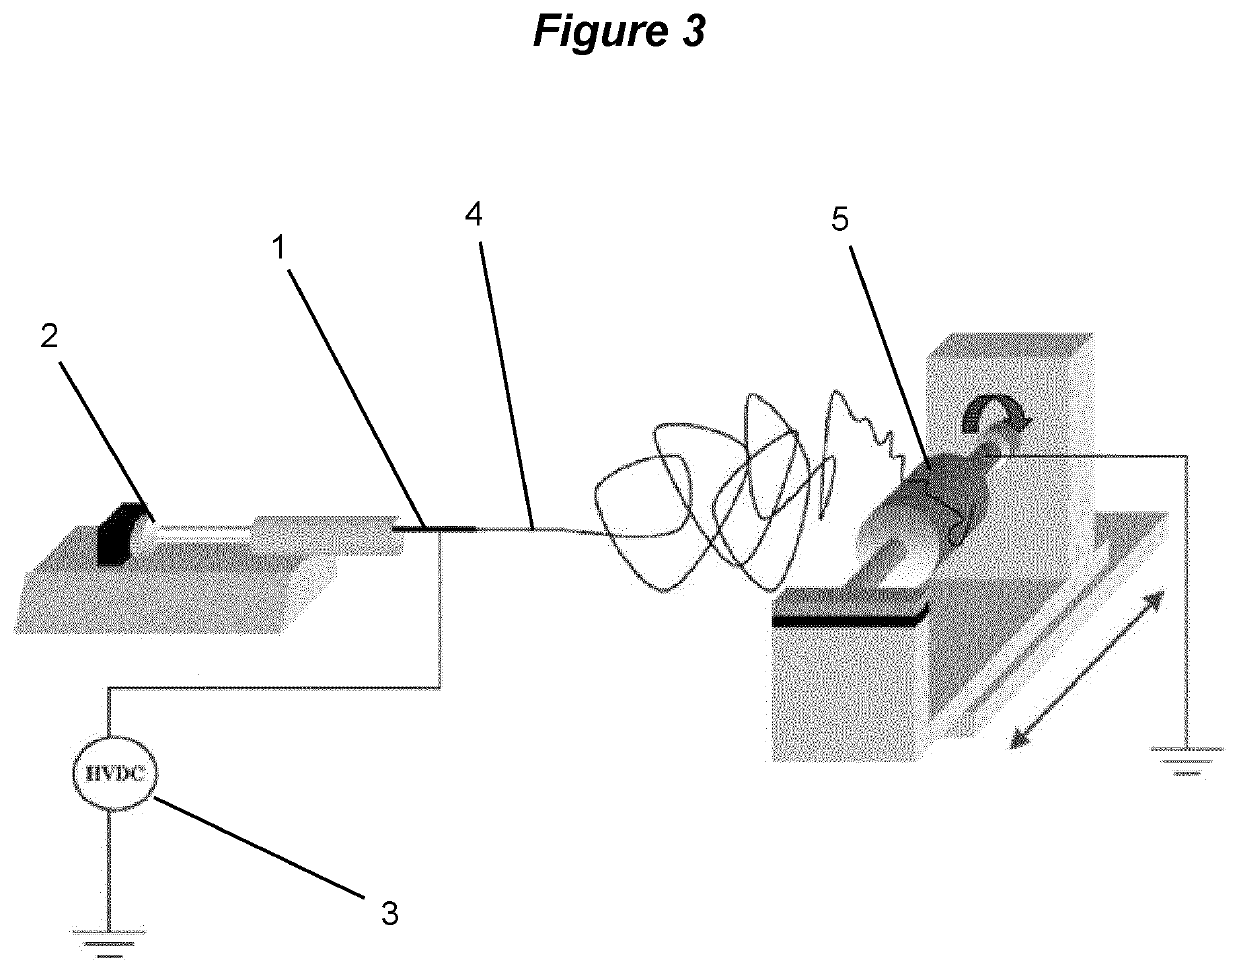 Tissue repair scaffold and device